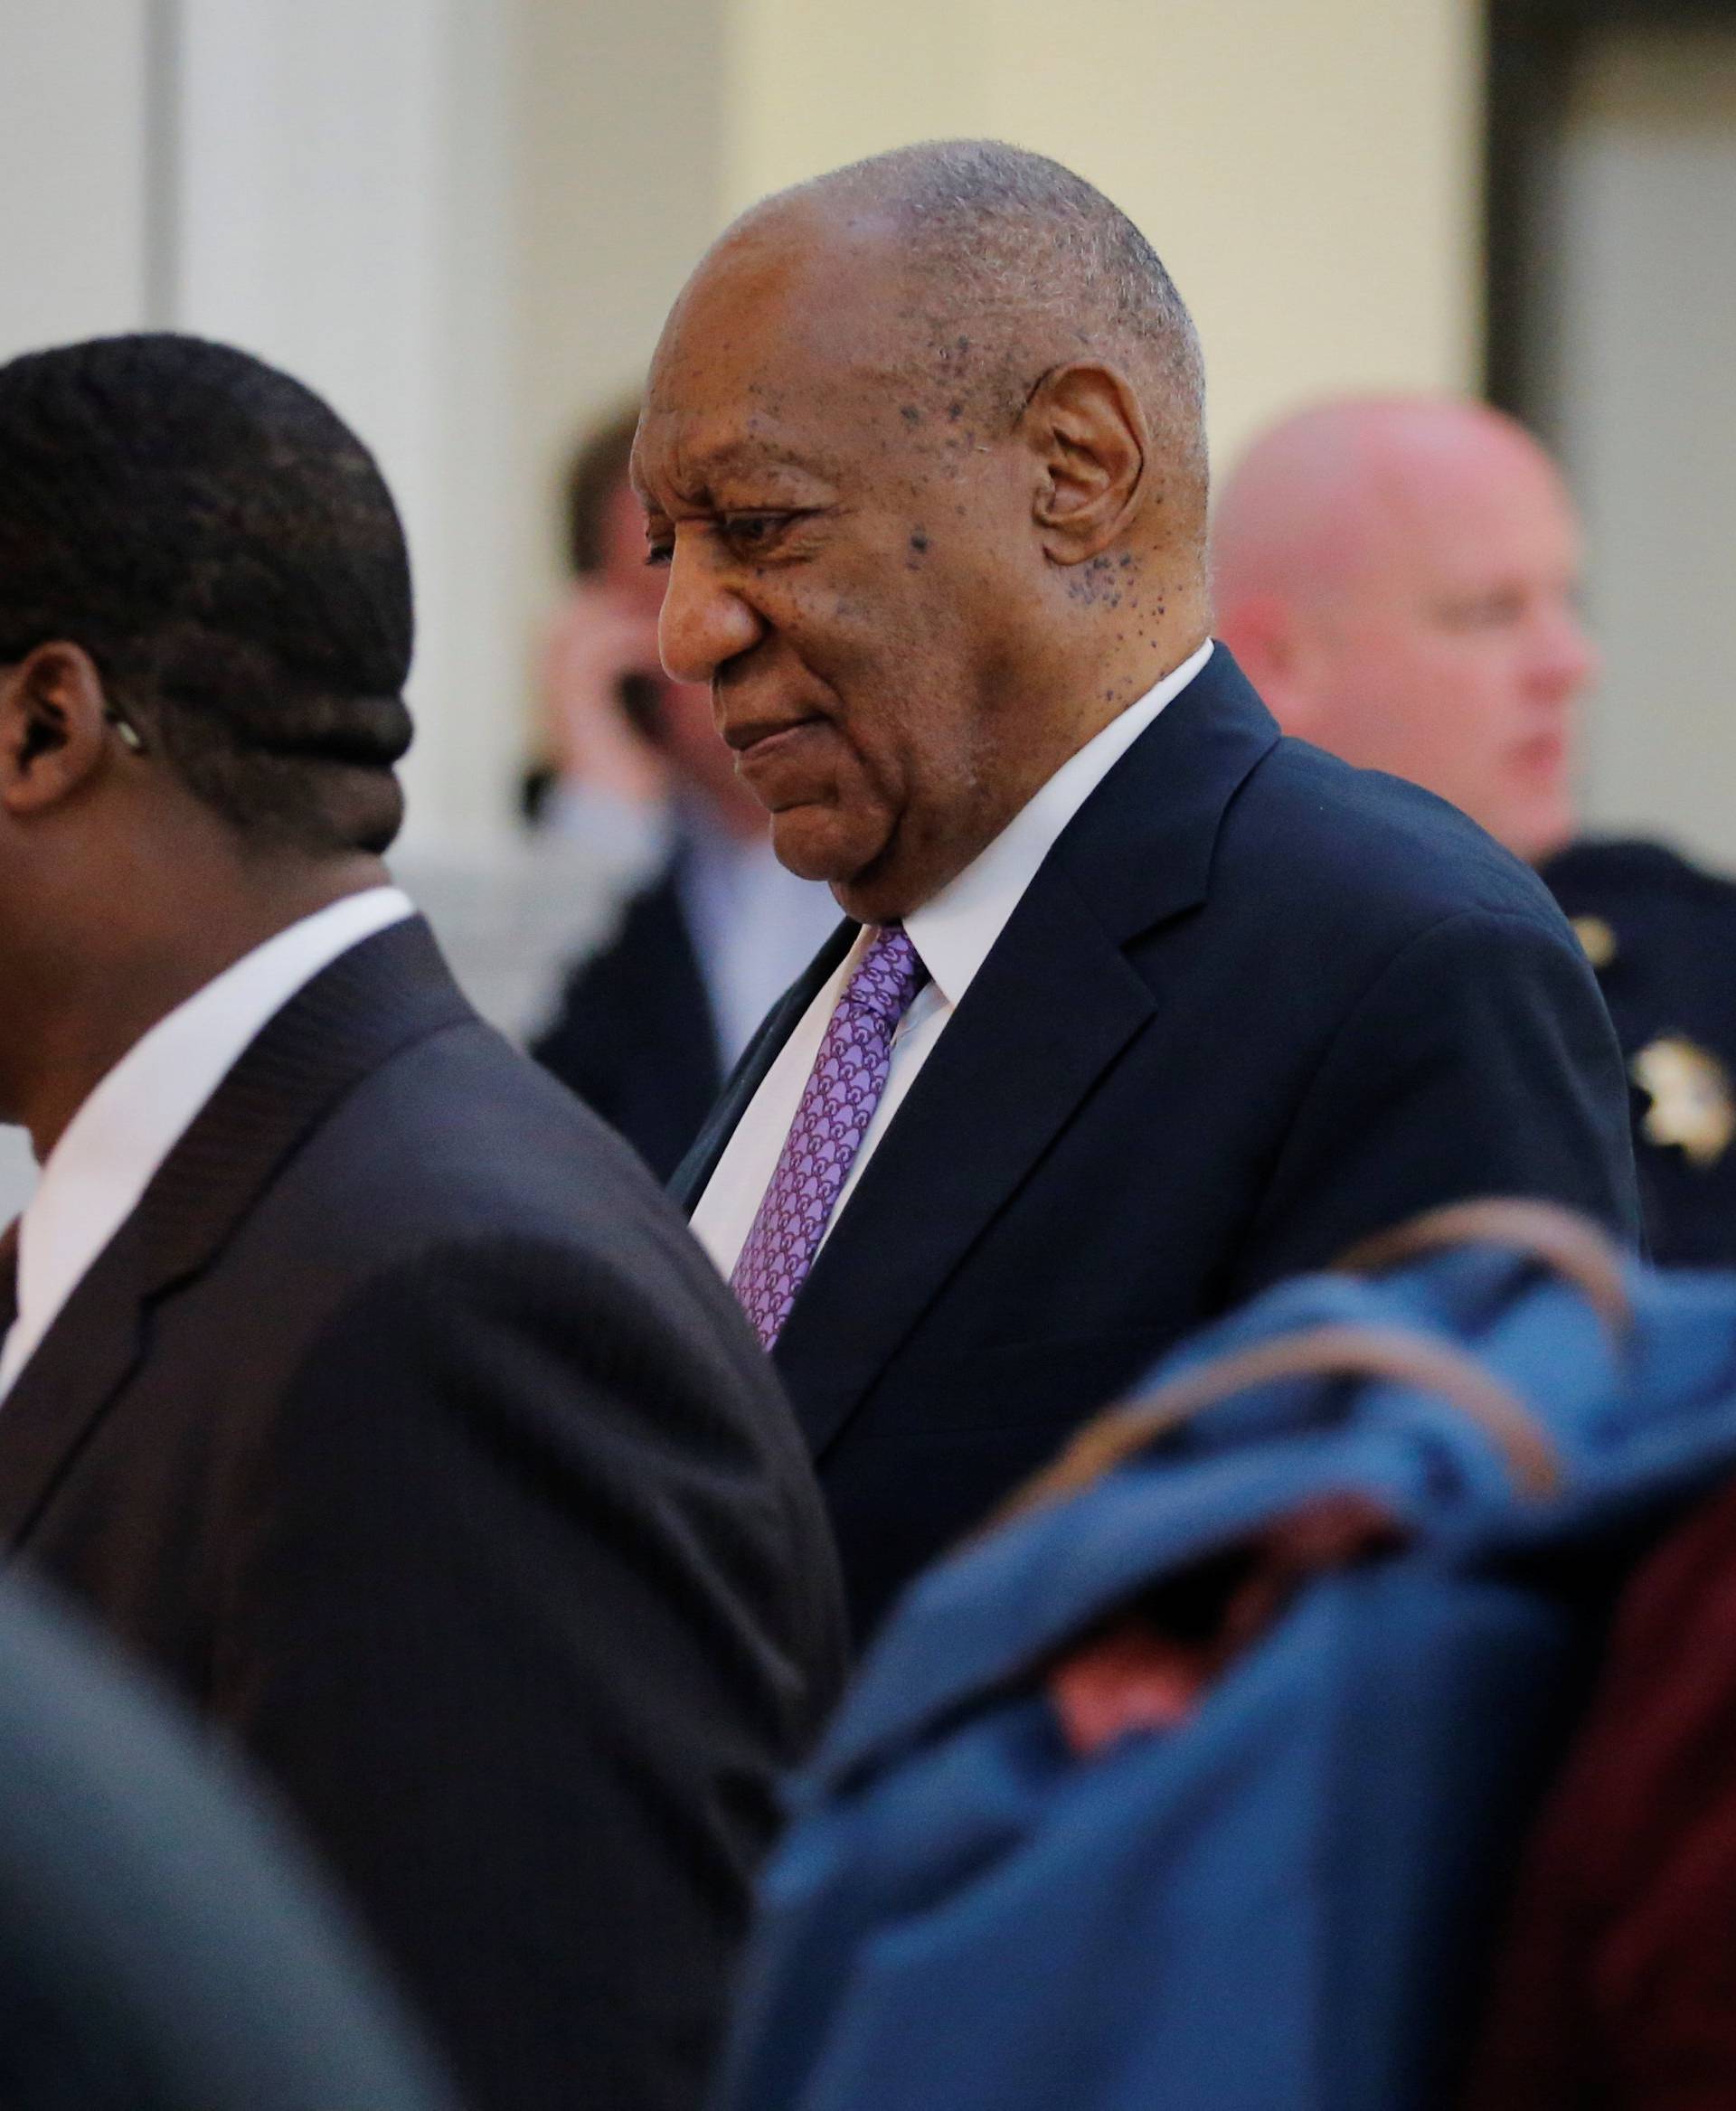 Cosby walks back into the courtroom after trail break in Norristown